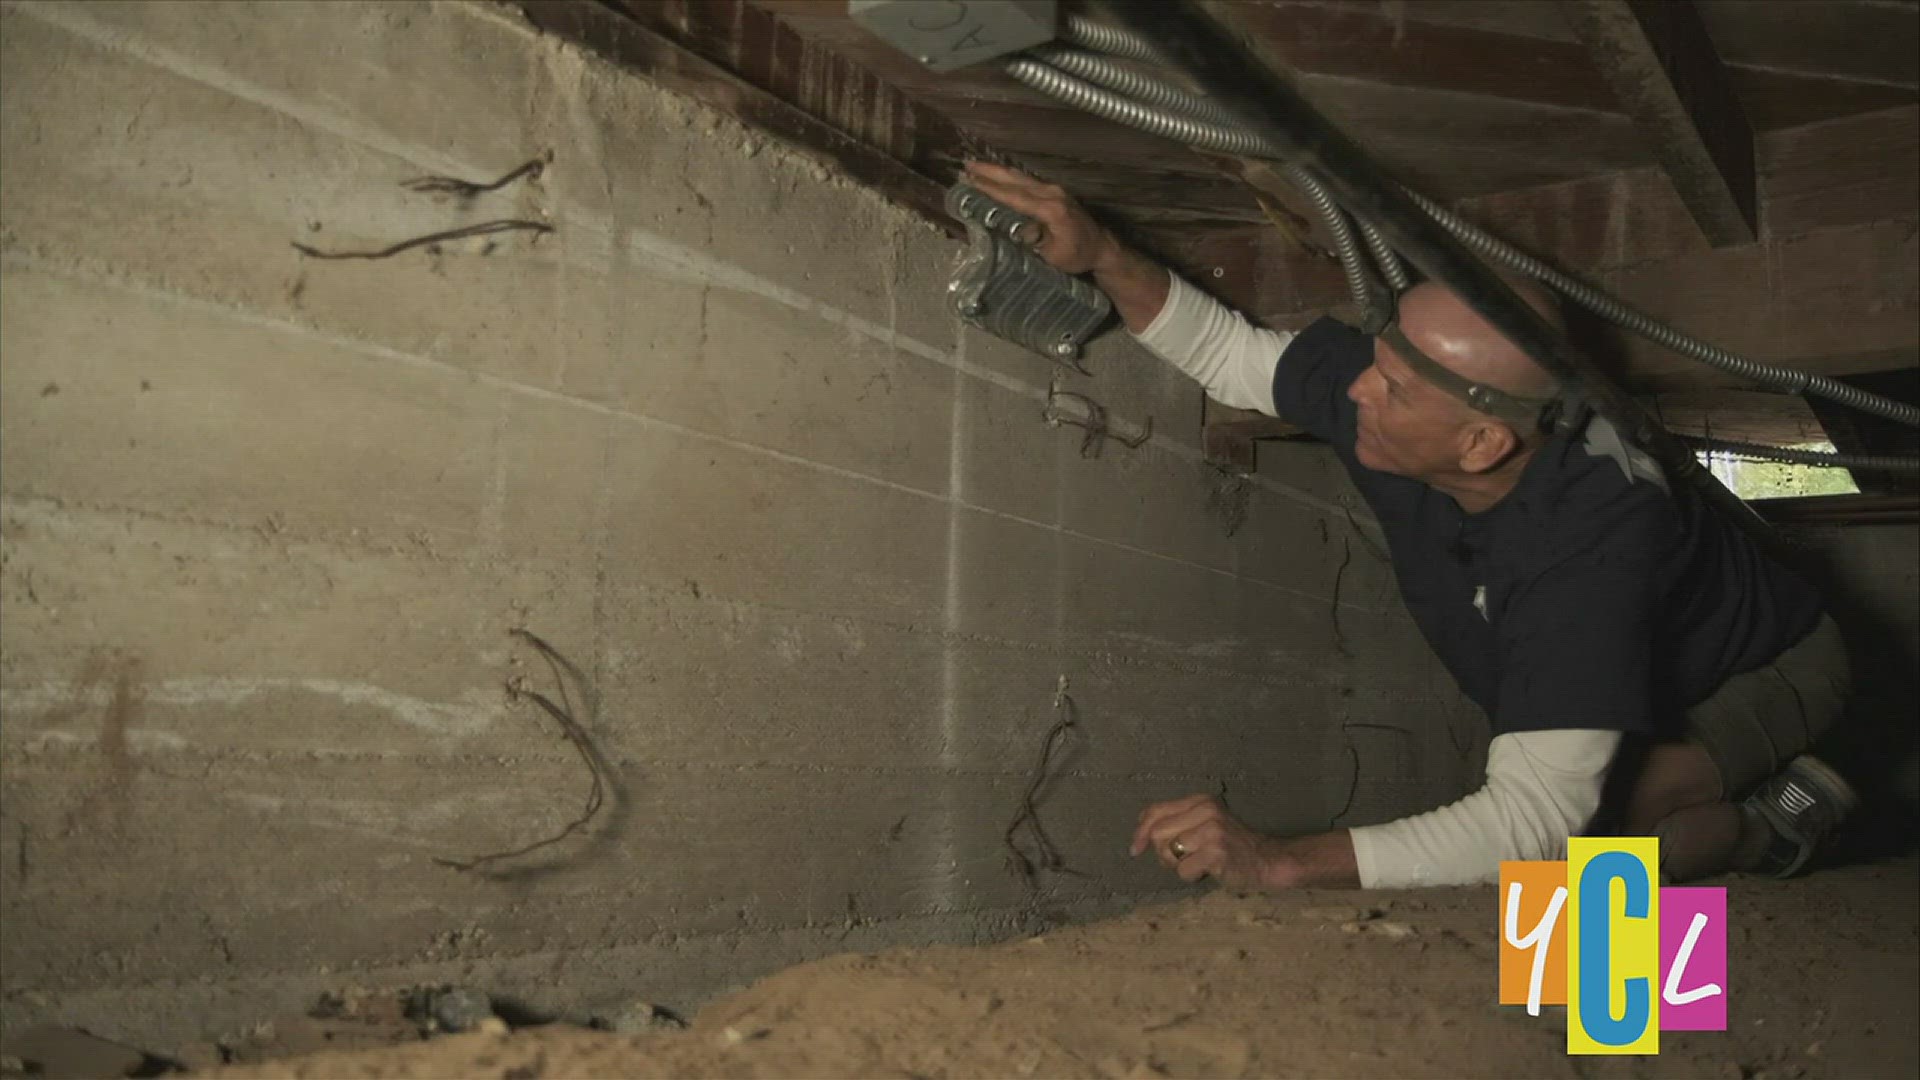 EBB helps California homeowners retrofit their house to reduce potential damage from earthquakes.